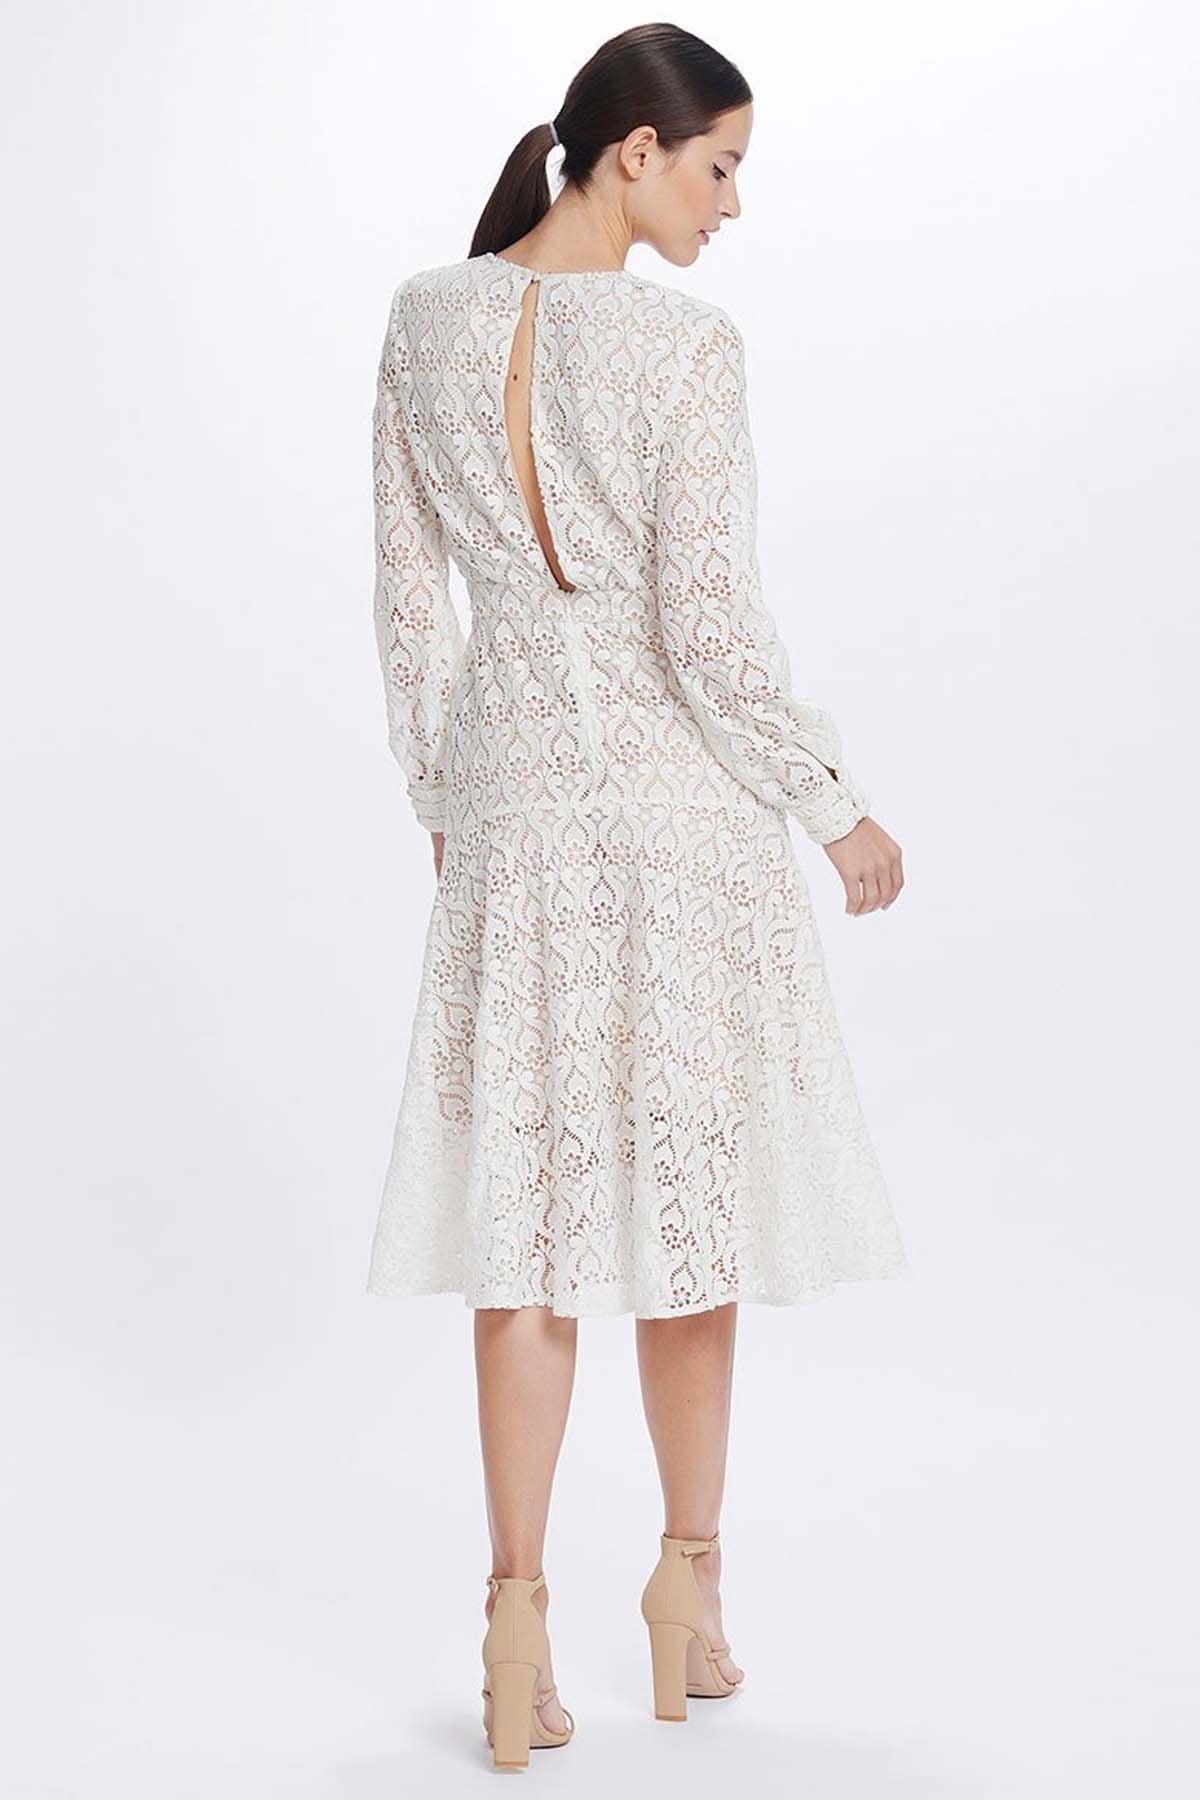 We Are Kindred Romily Midi Dress Ivory